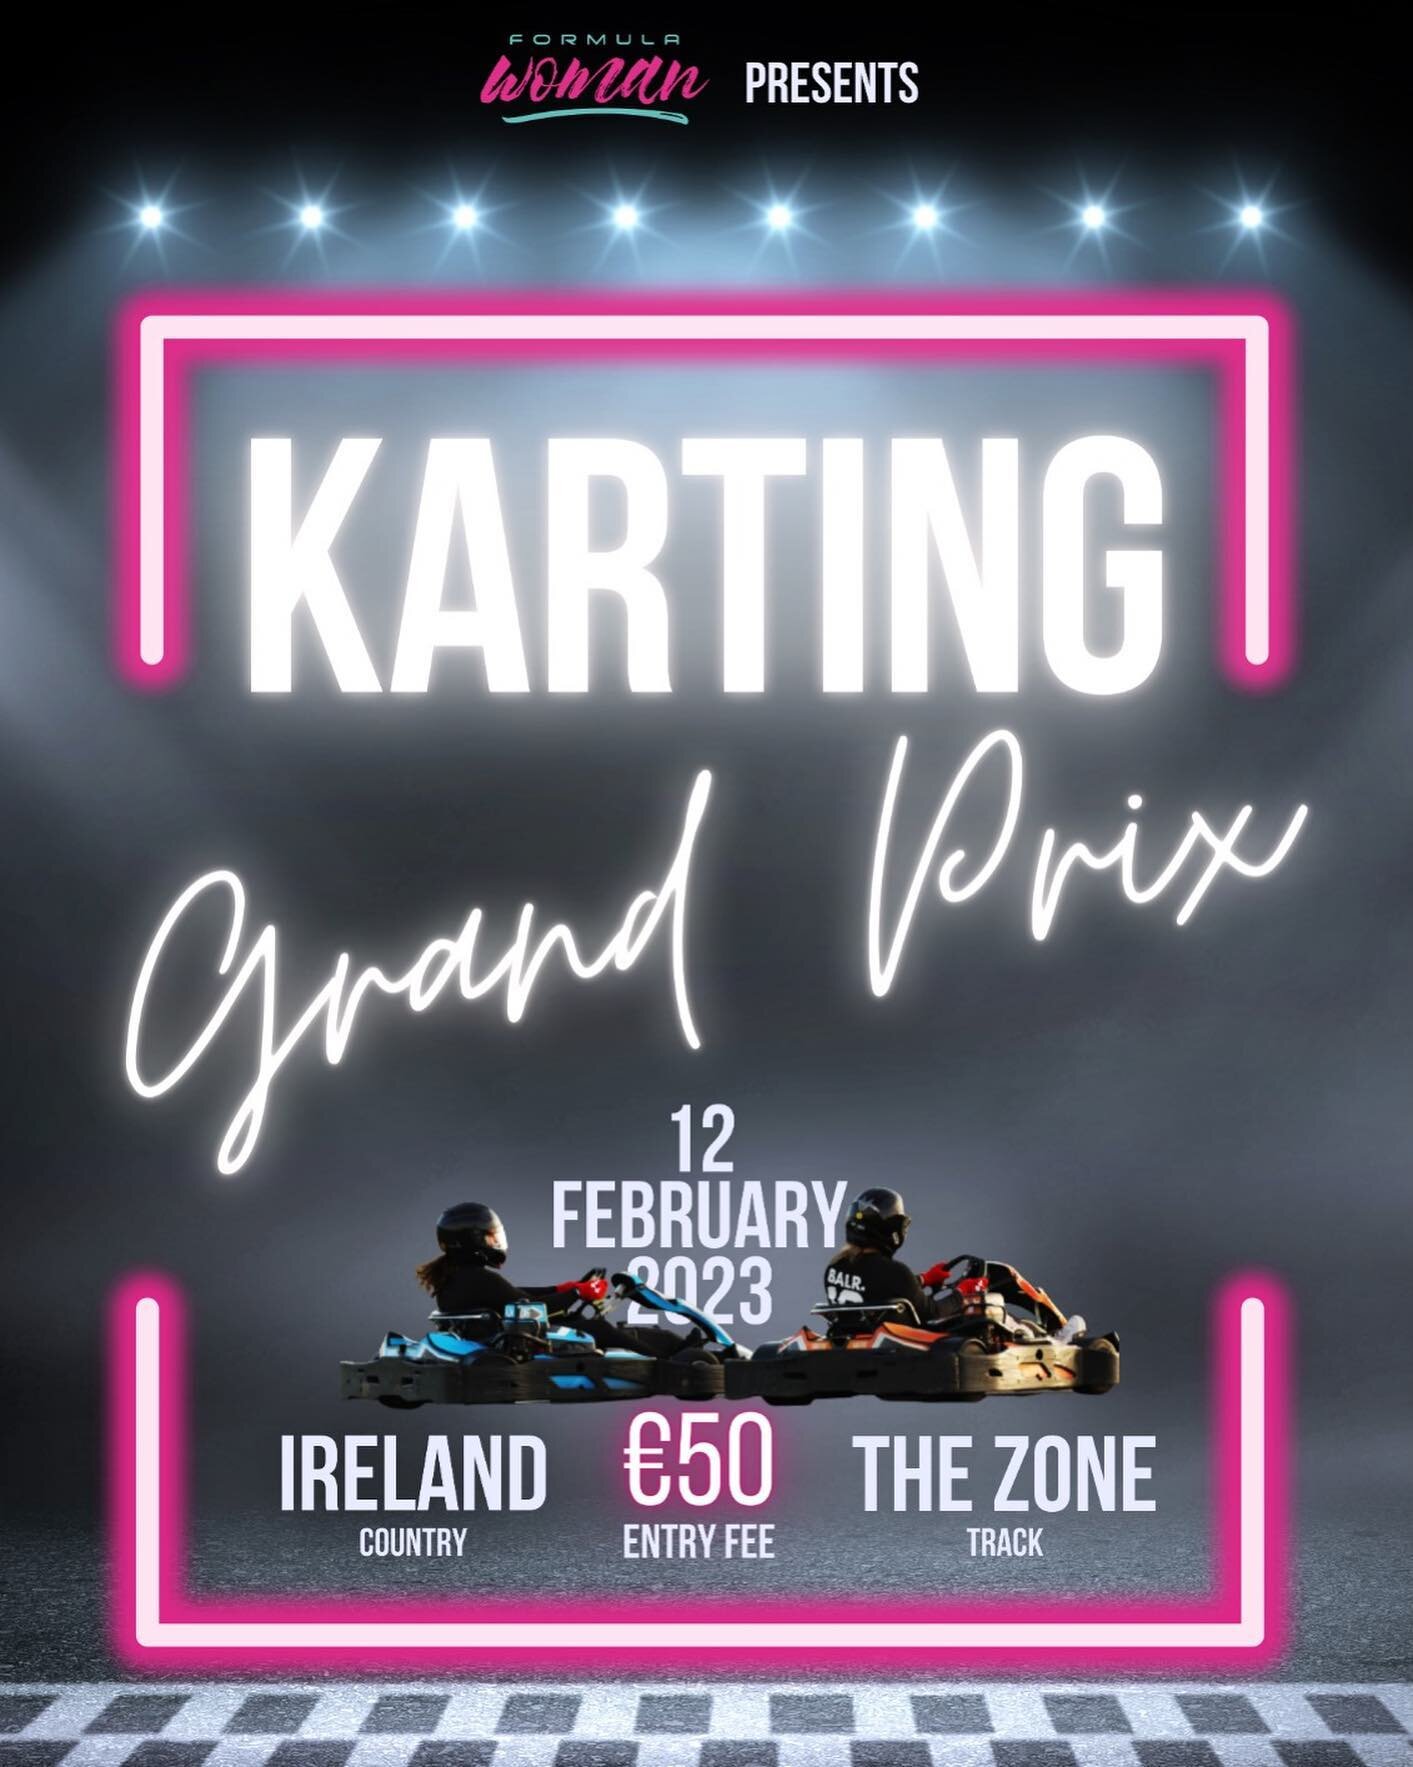 We are excited to announce the first event of many for the year - hosted by one of our Irish Representatives @lilfuzzballcelsie 🇮🇪

There will be Karting at @the_zone_navan on the 12th of February at 4 pm!

It will be &euro;50 pp and subject to ava